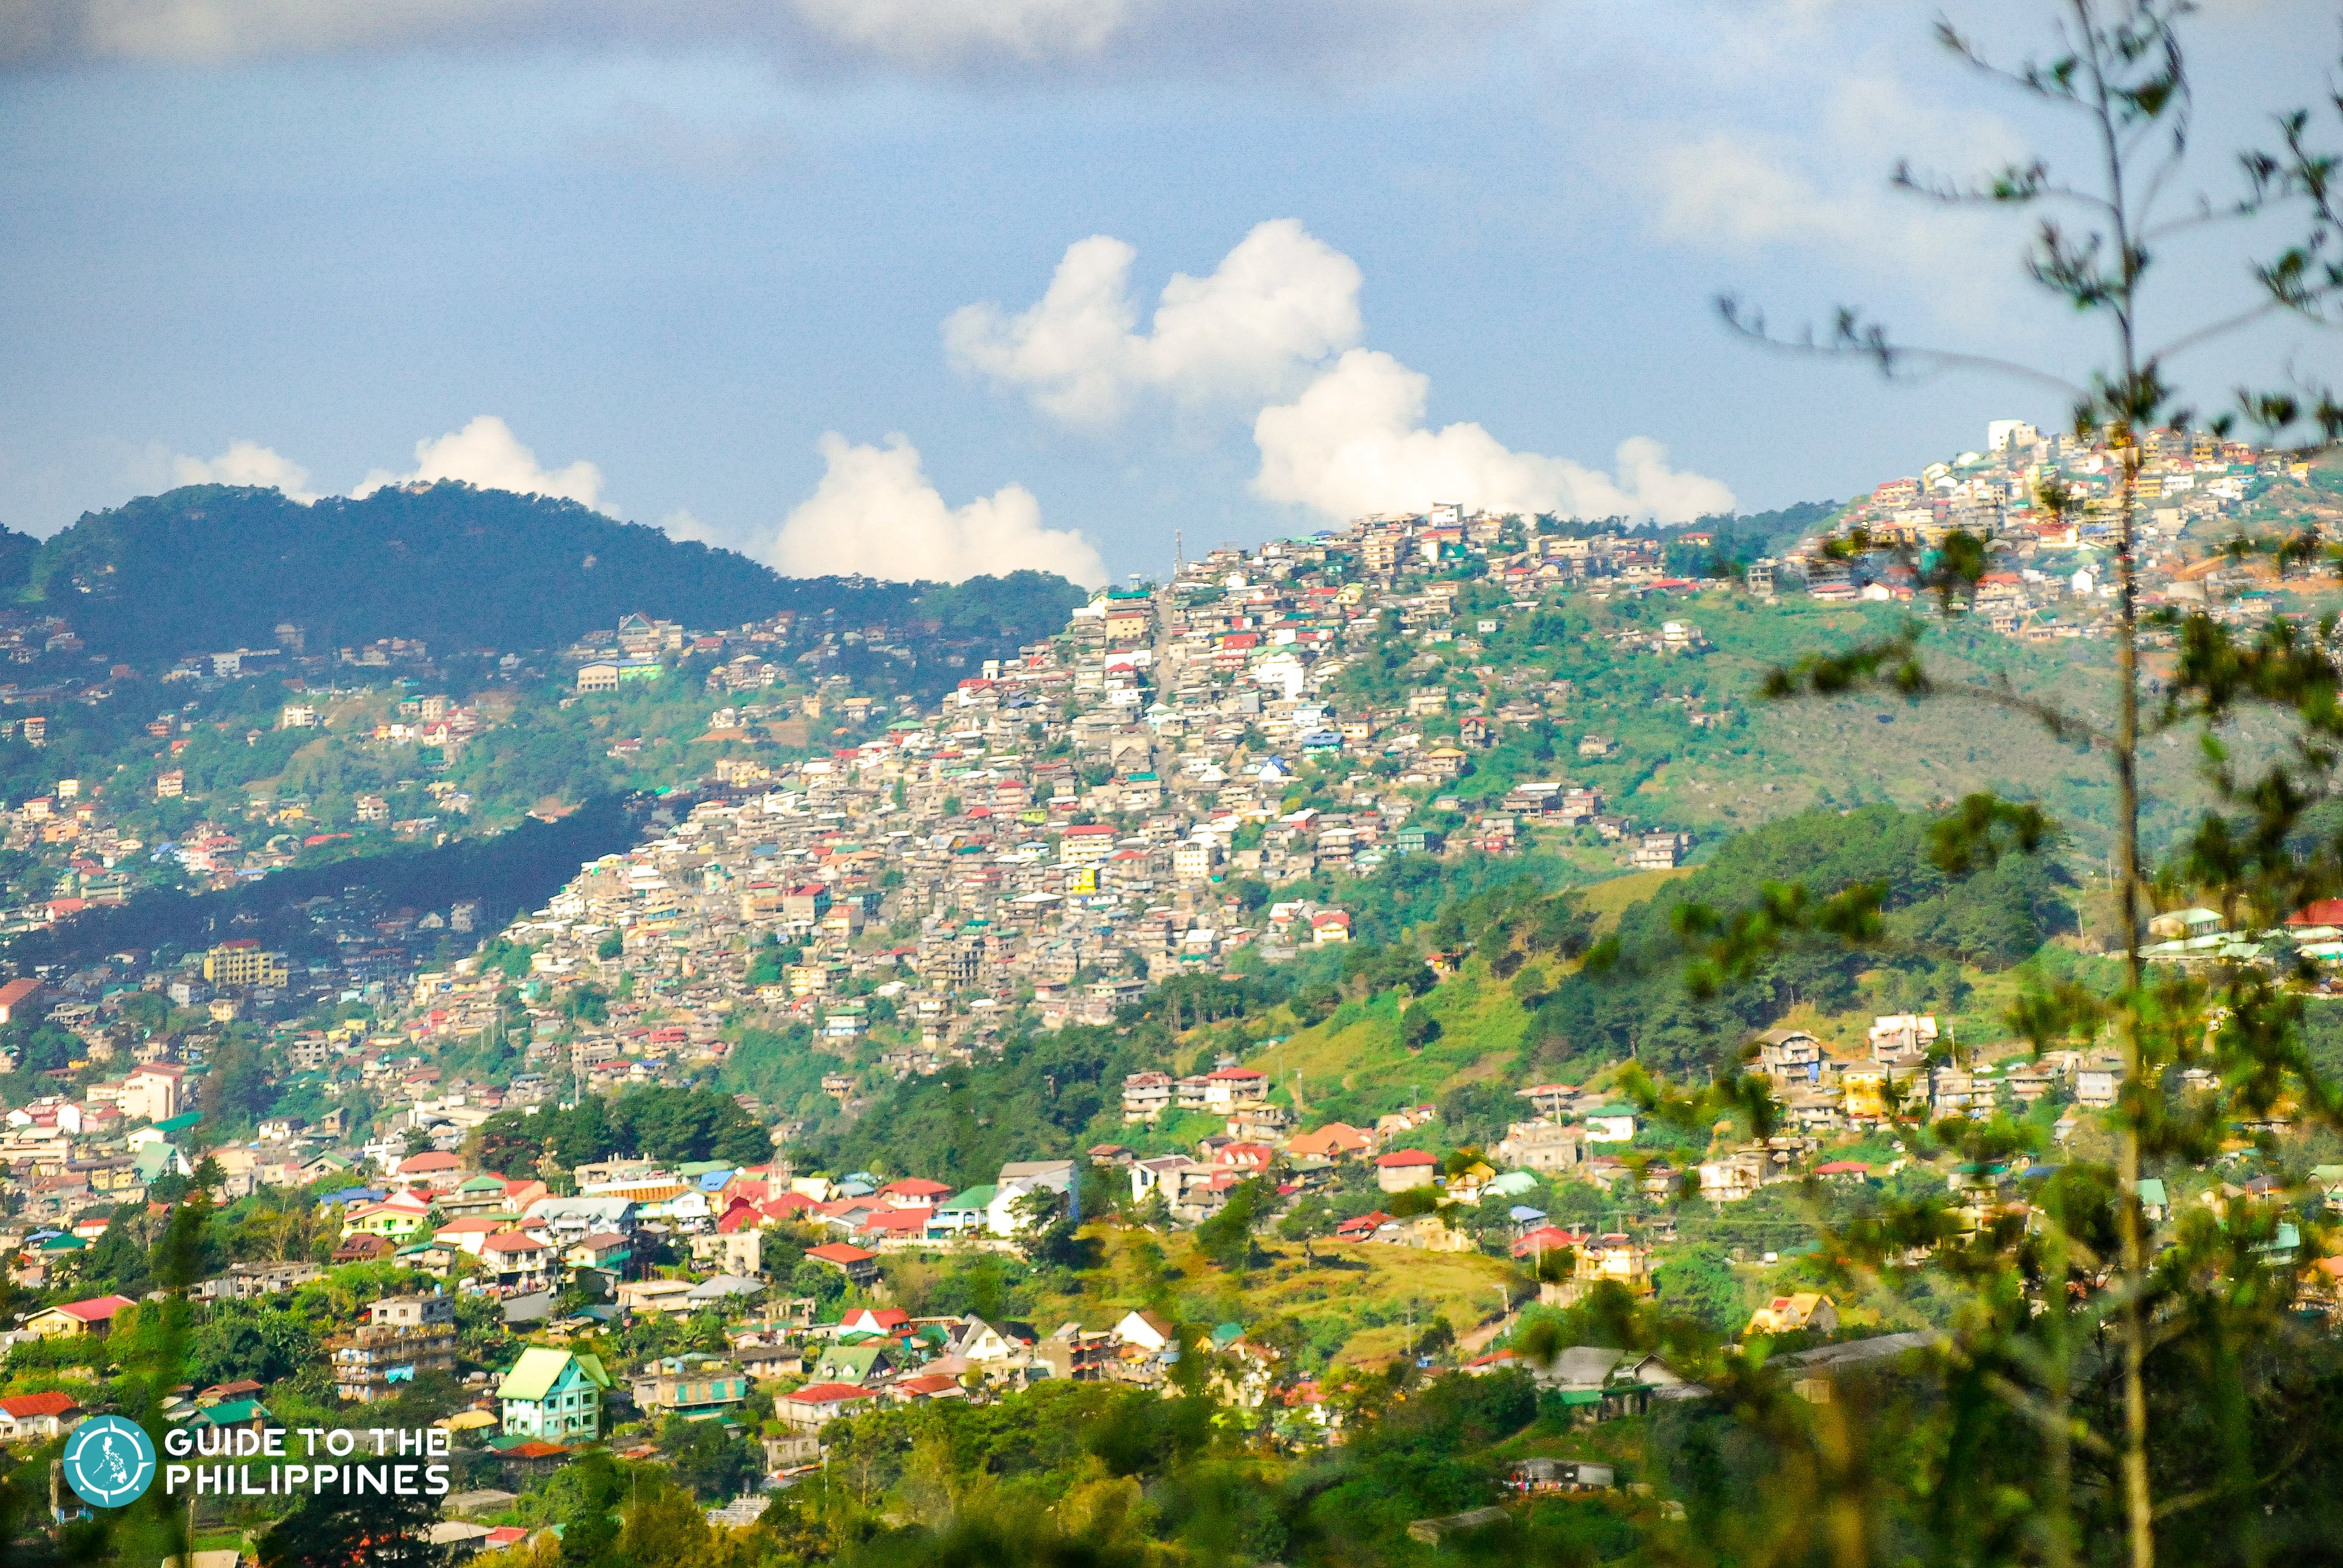 Scenic view from Mines View Park in Baguio City